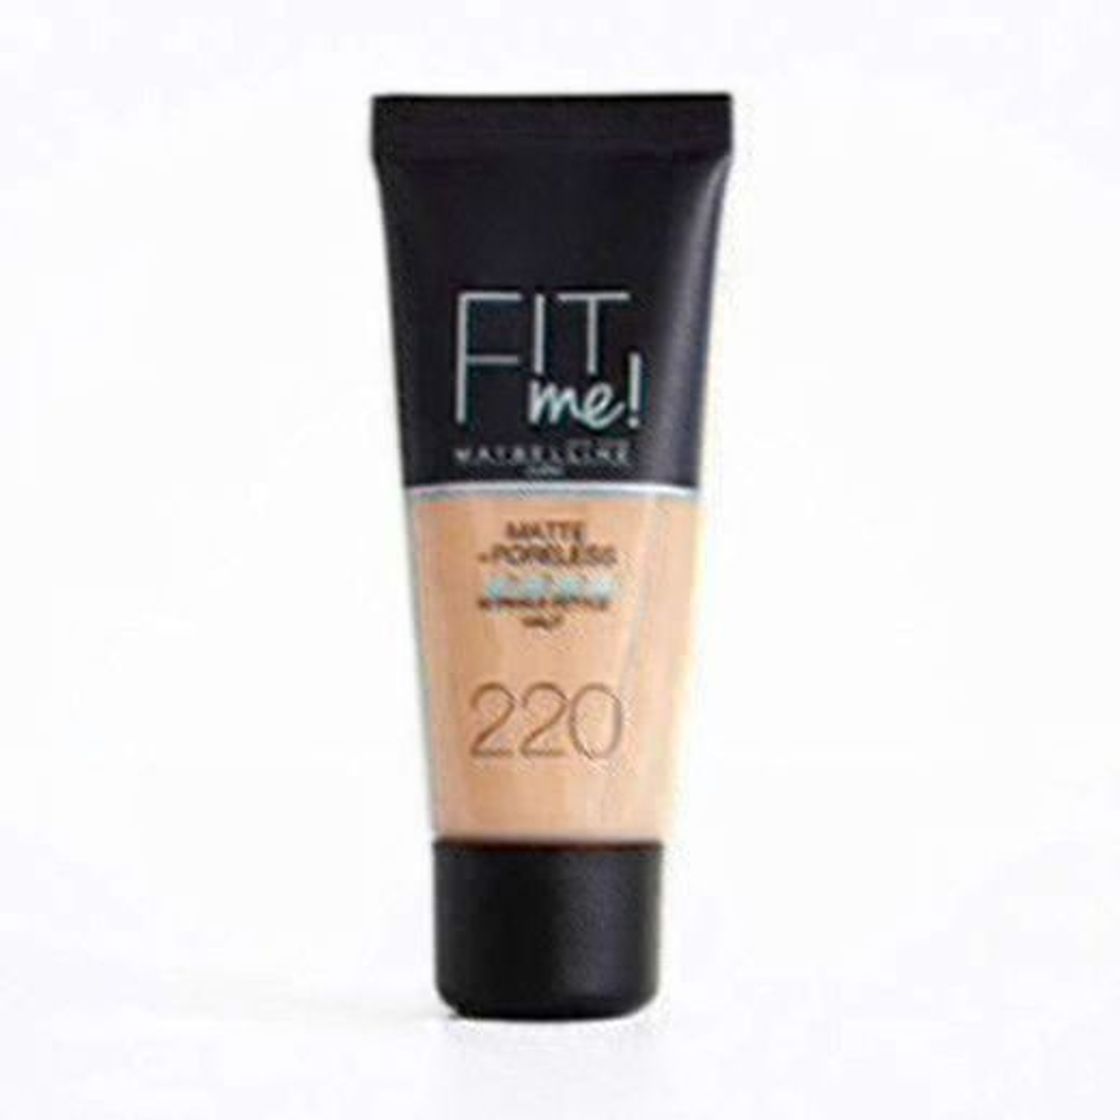 Maybelline Fit Me Base de Maquillaje Mate